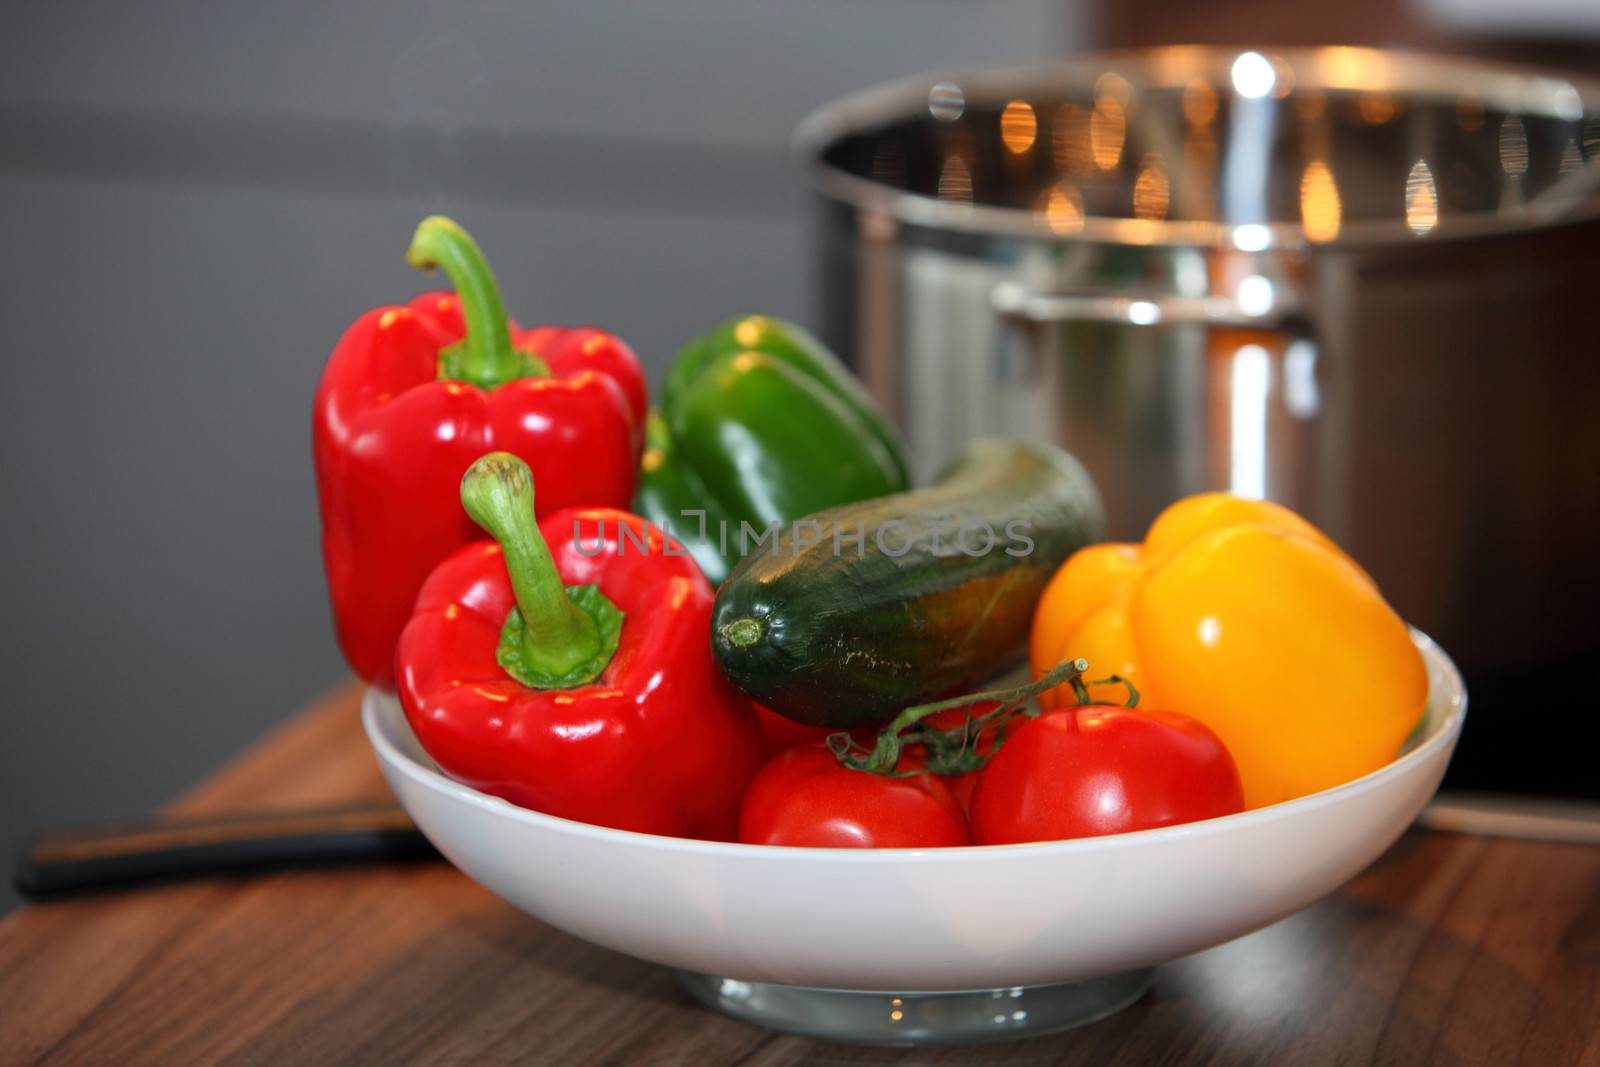 Brightly coloured bowl of vegetables with red, green and yellow bell peppers and tomatoes standing on a kitchen table near the stove and a saucepan